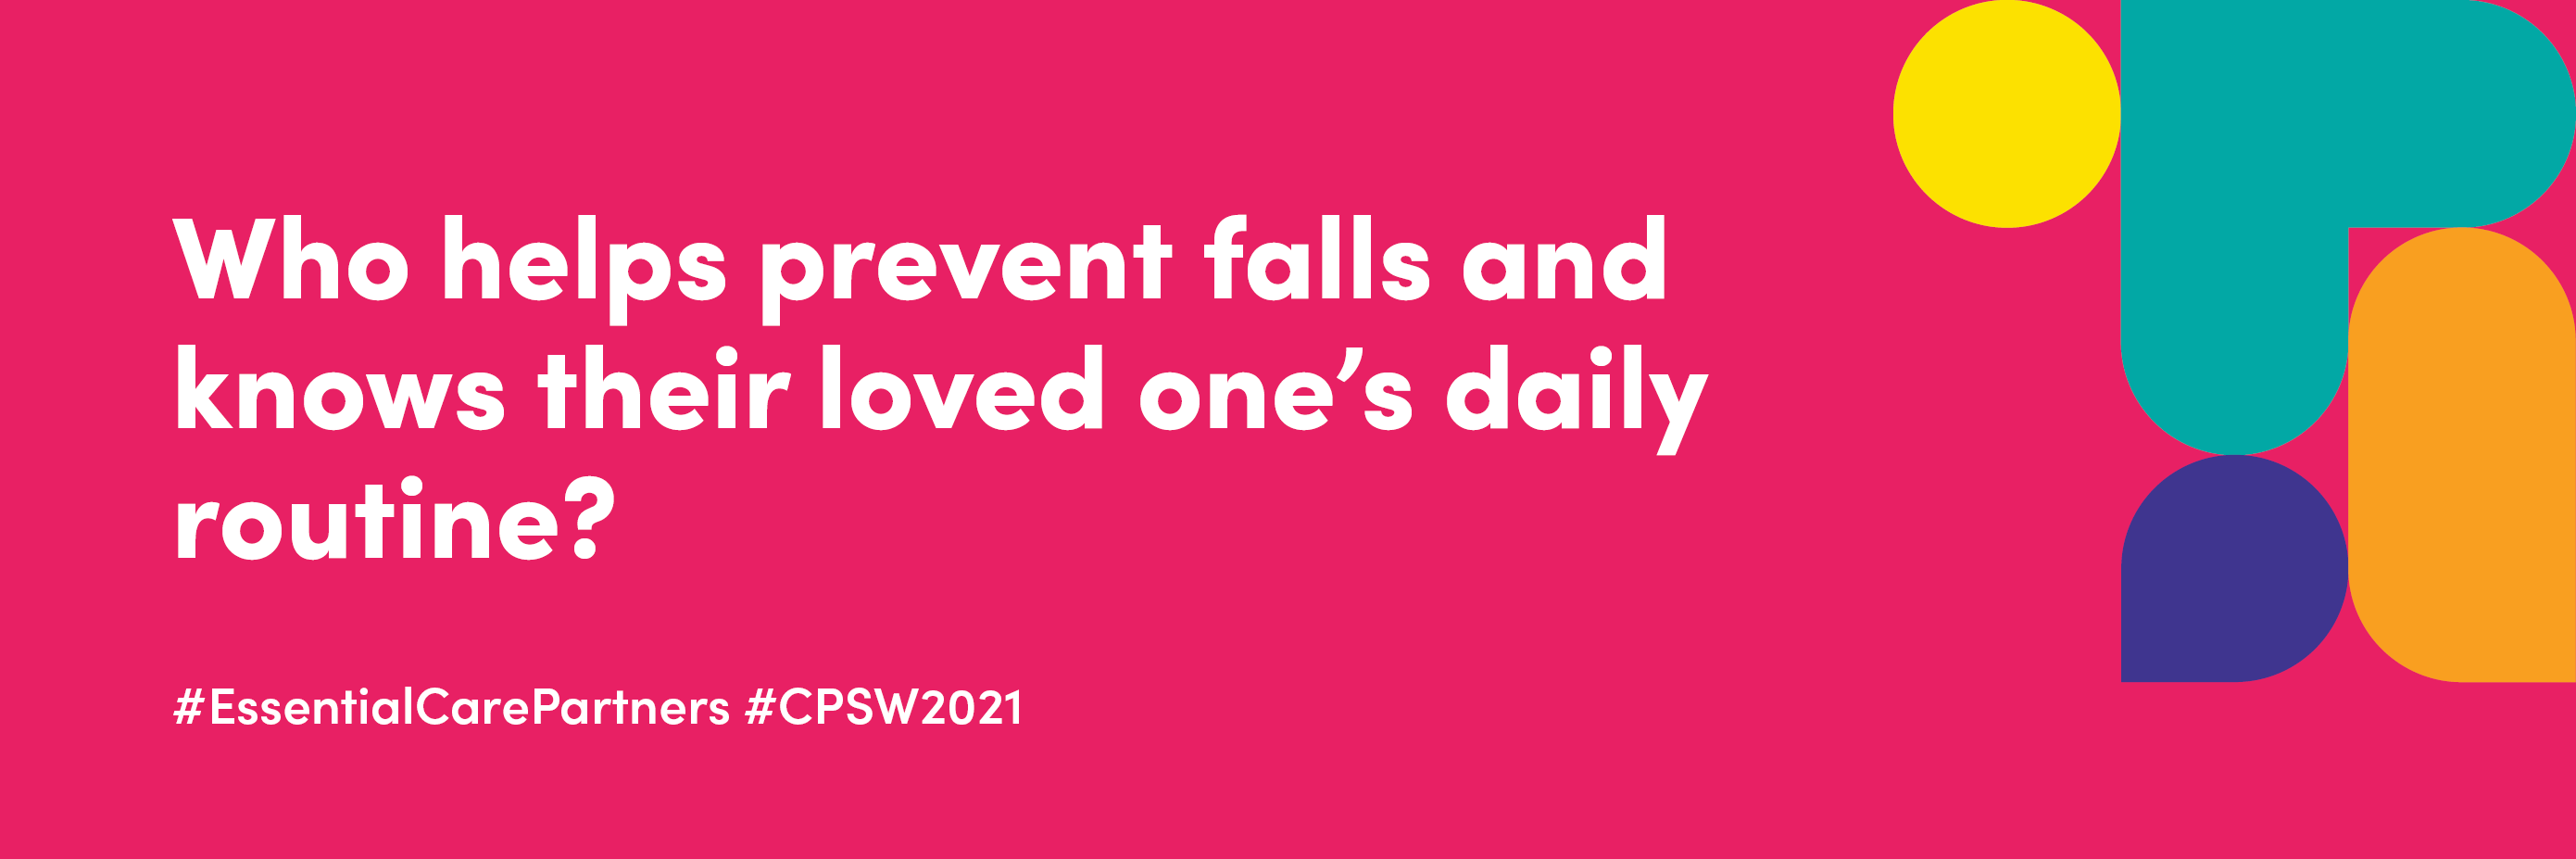 Who helps prevent falls and knows their loved one's daily routine?